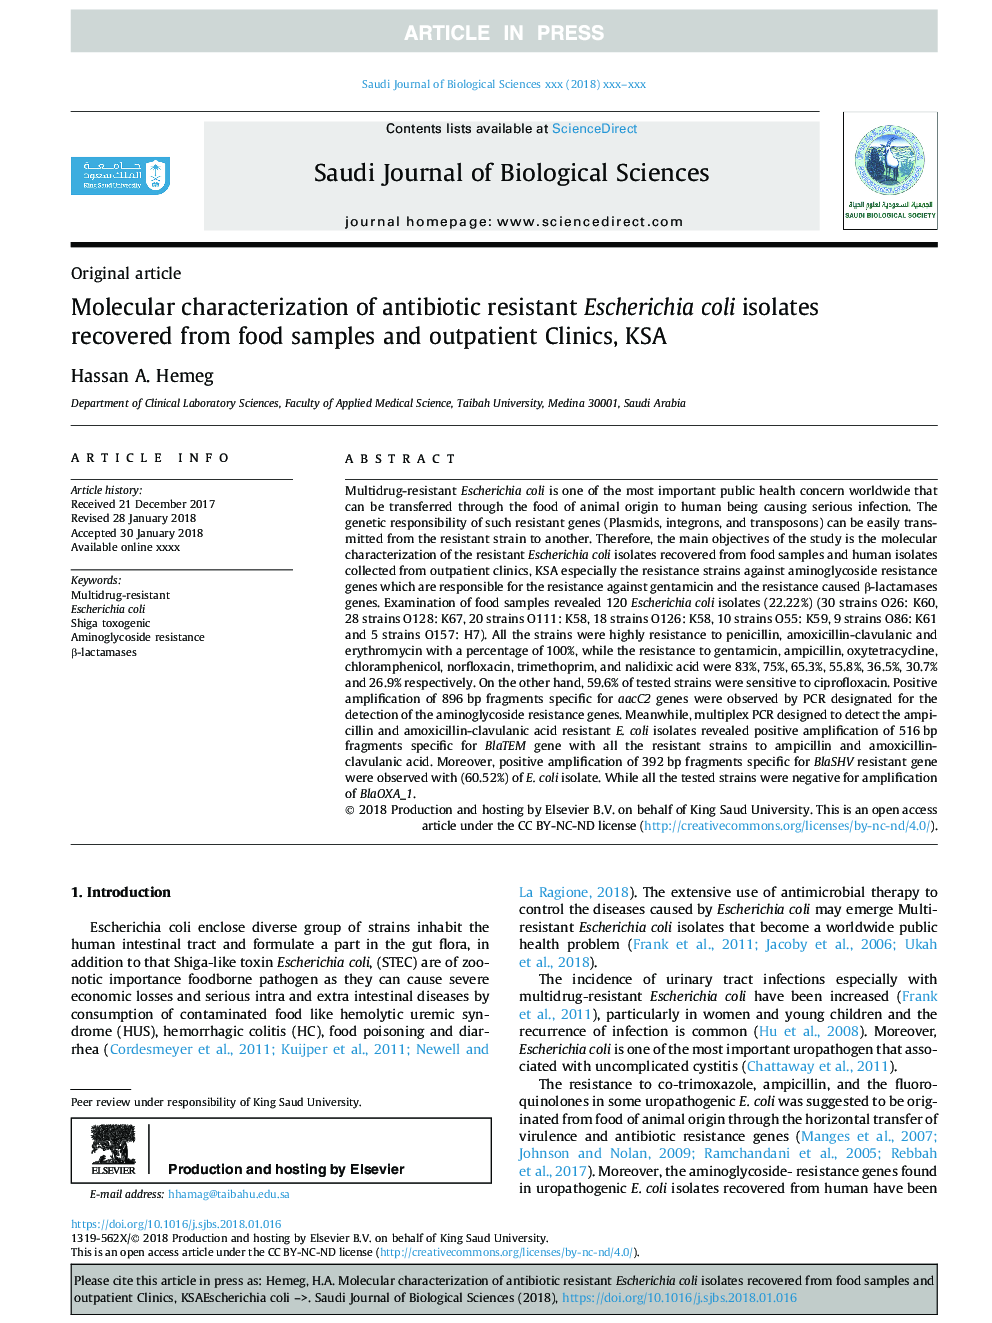 Molecular characterization of antibiotic resistant Escherichia coli isolates recovered from food samples and outpatient Clinics, KSA